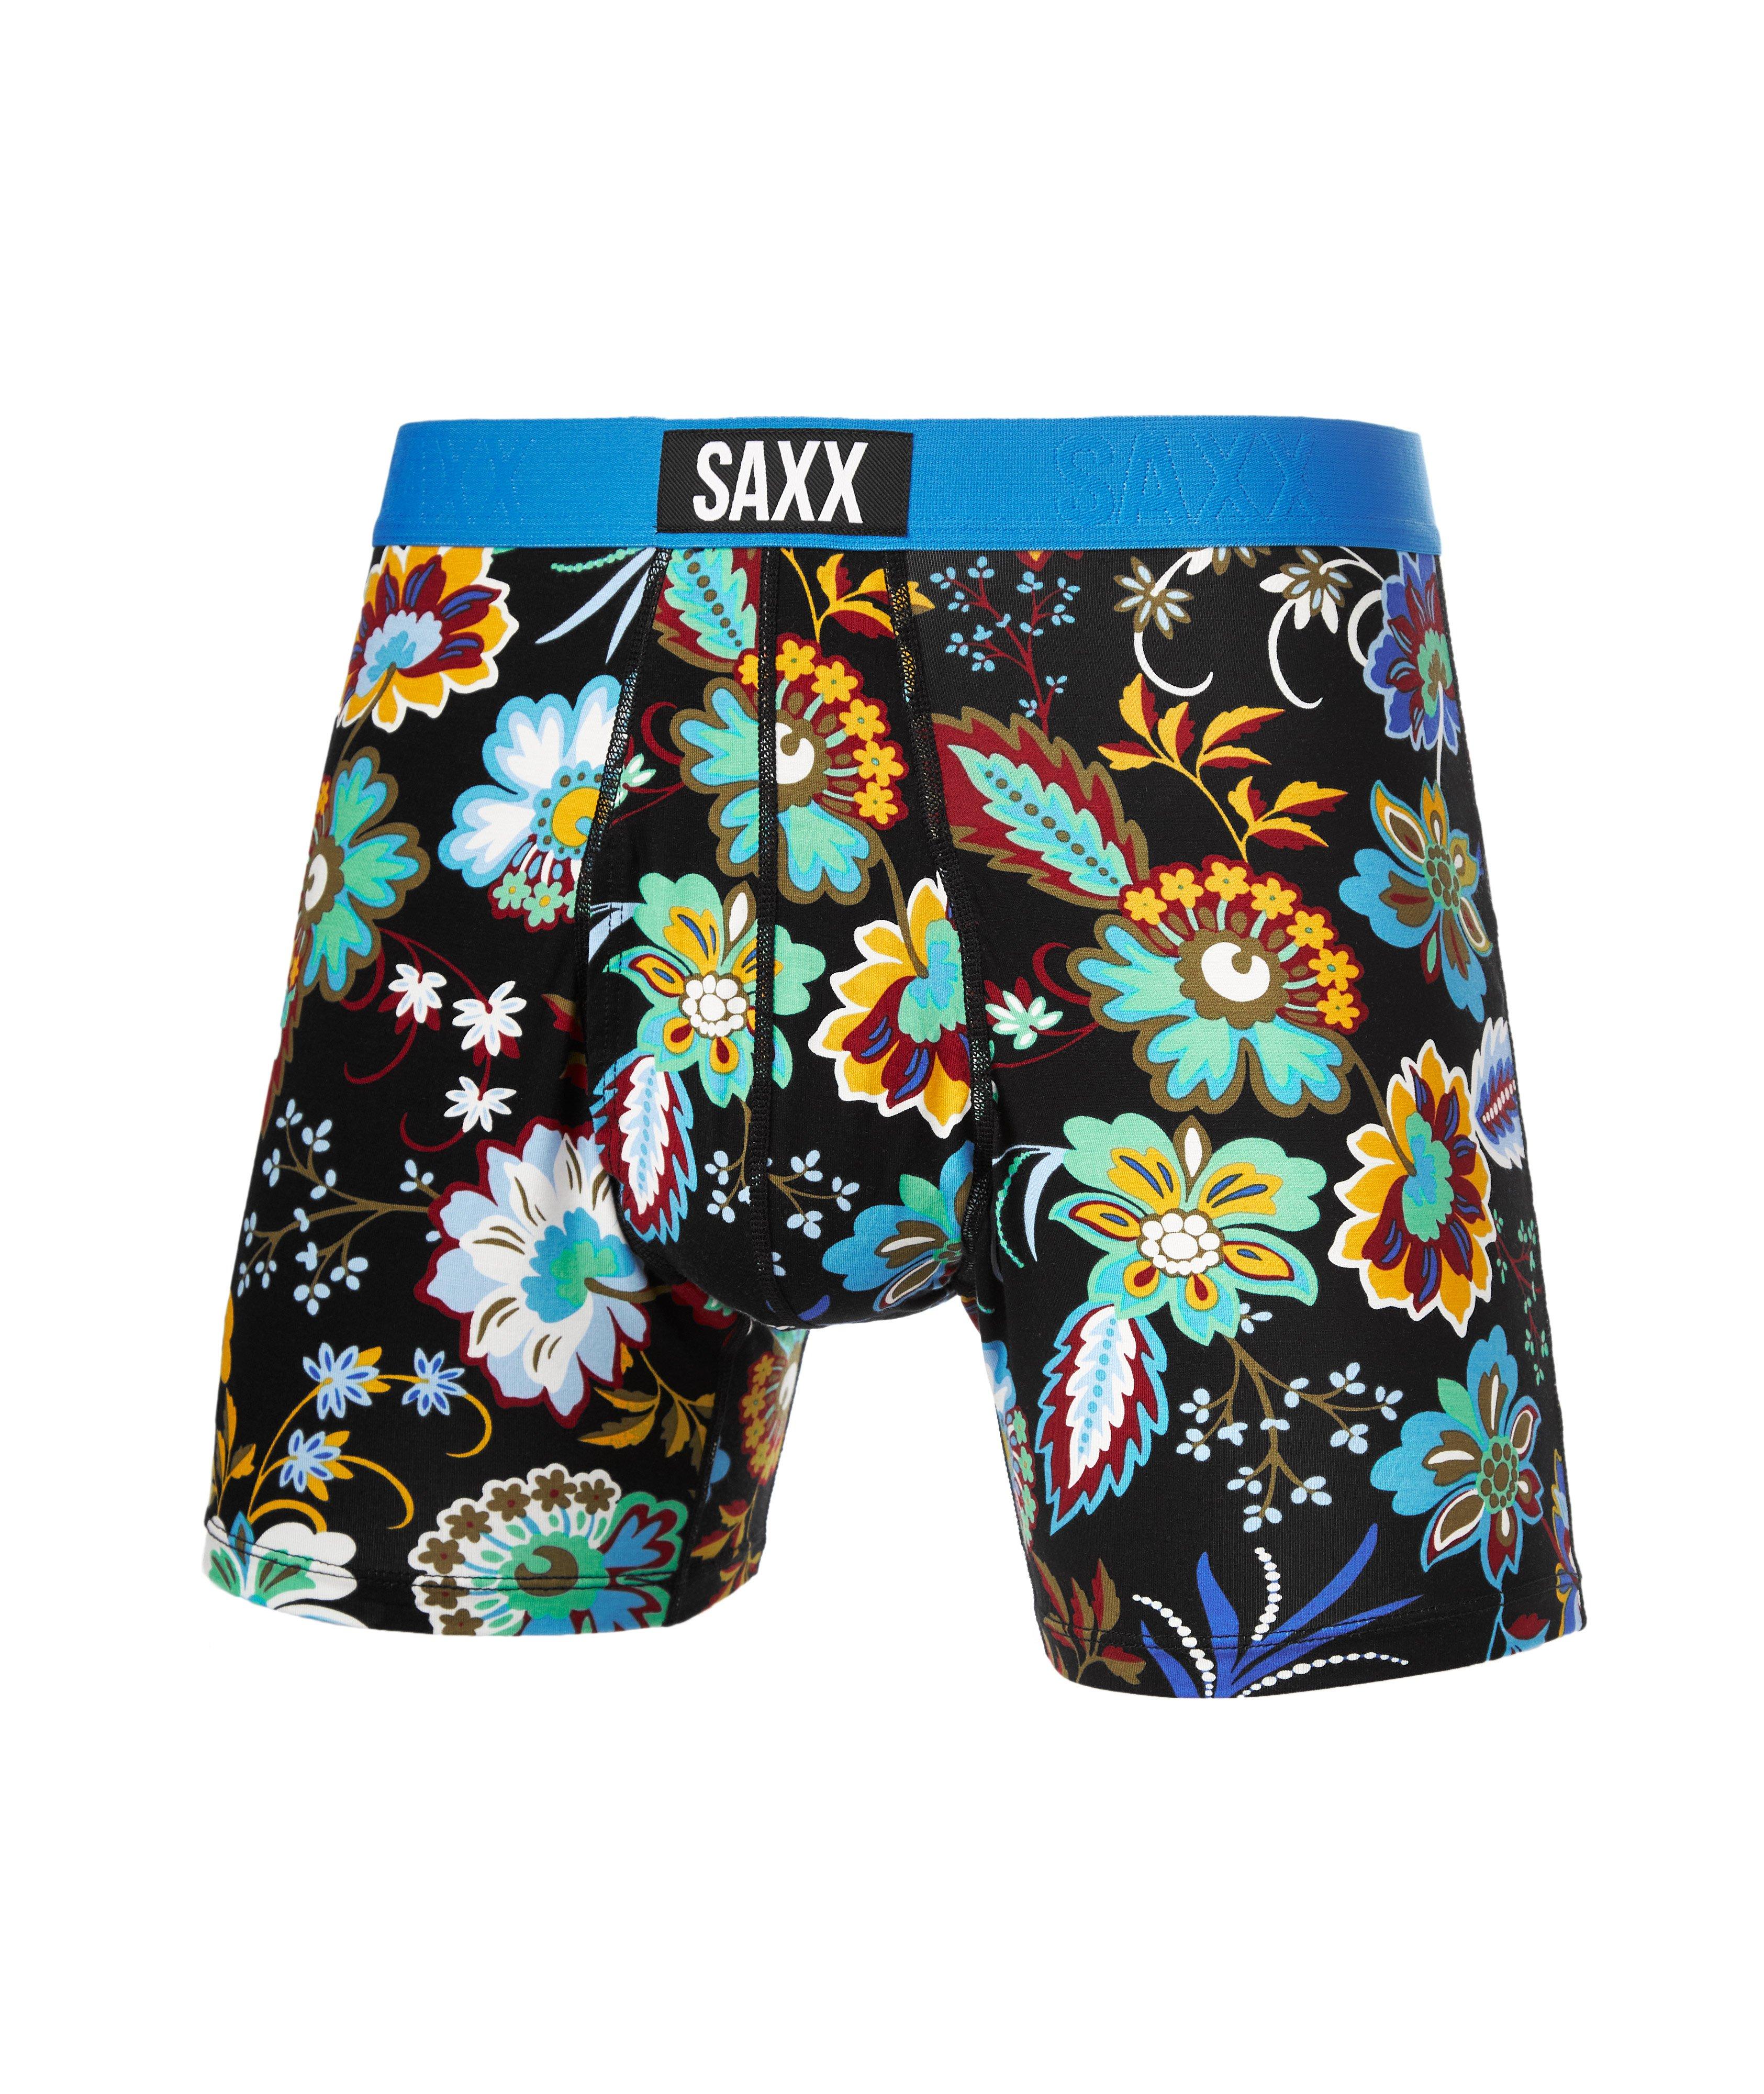 2-Pack Ultra Boxer Briefs image 0